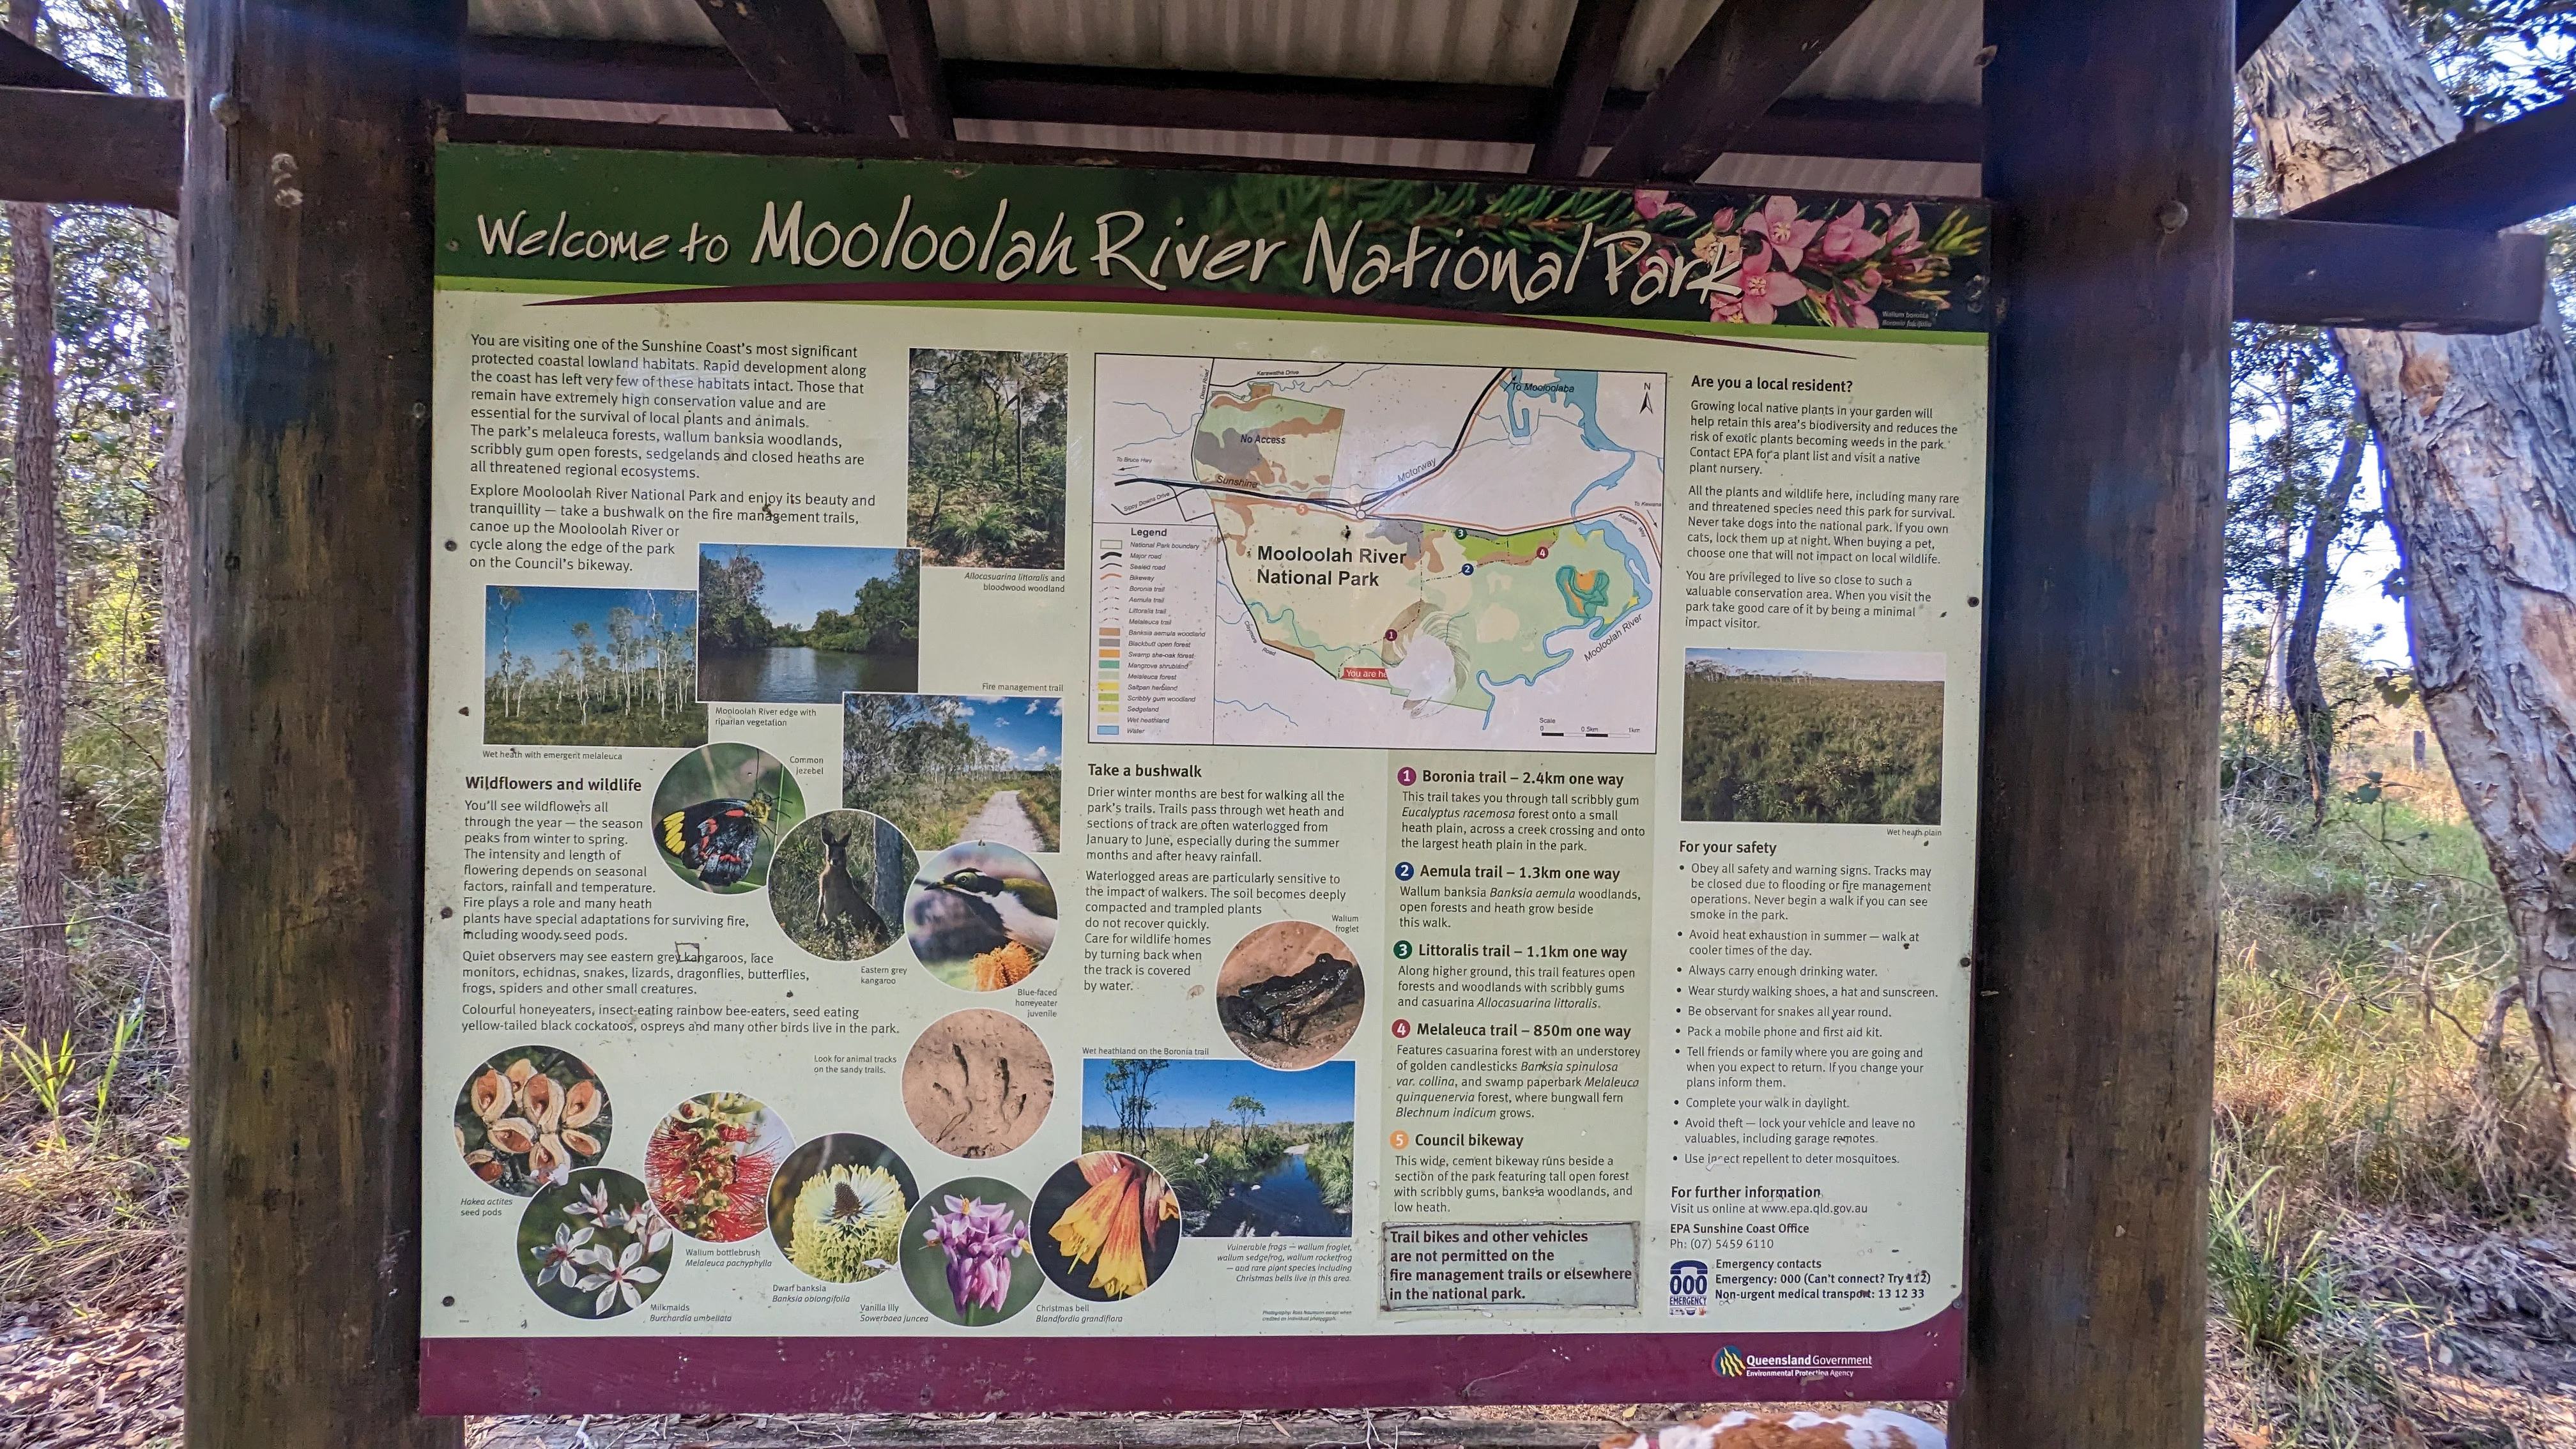 Mooloolah River National Park, Sippy Downs